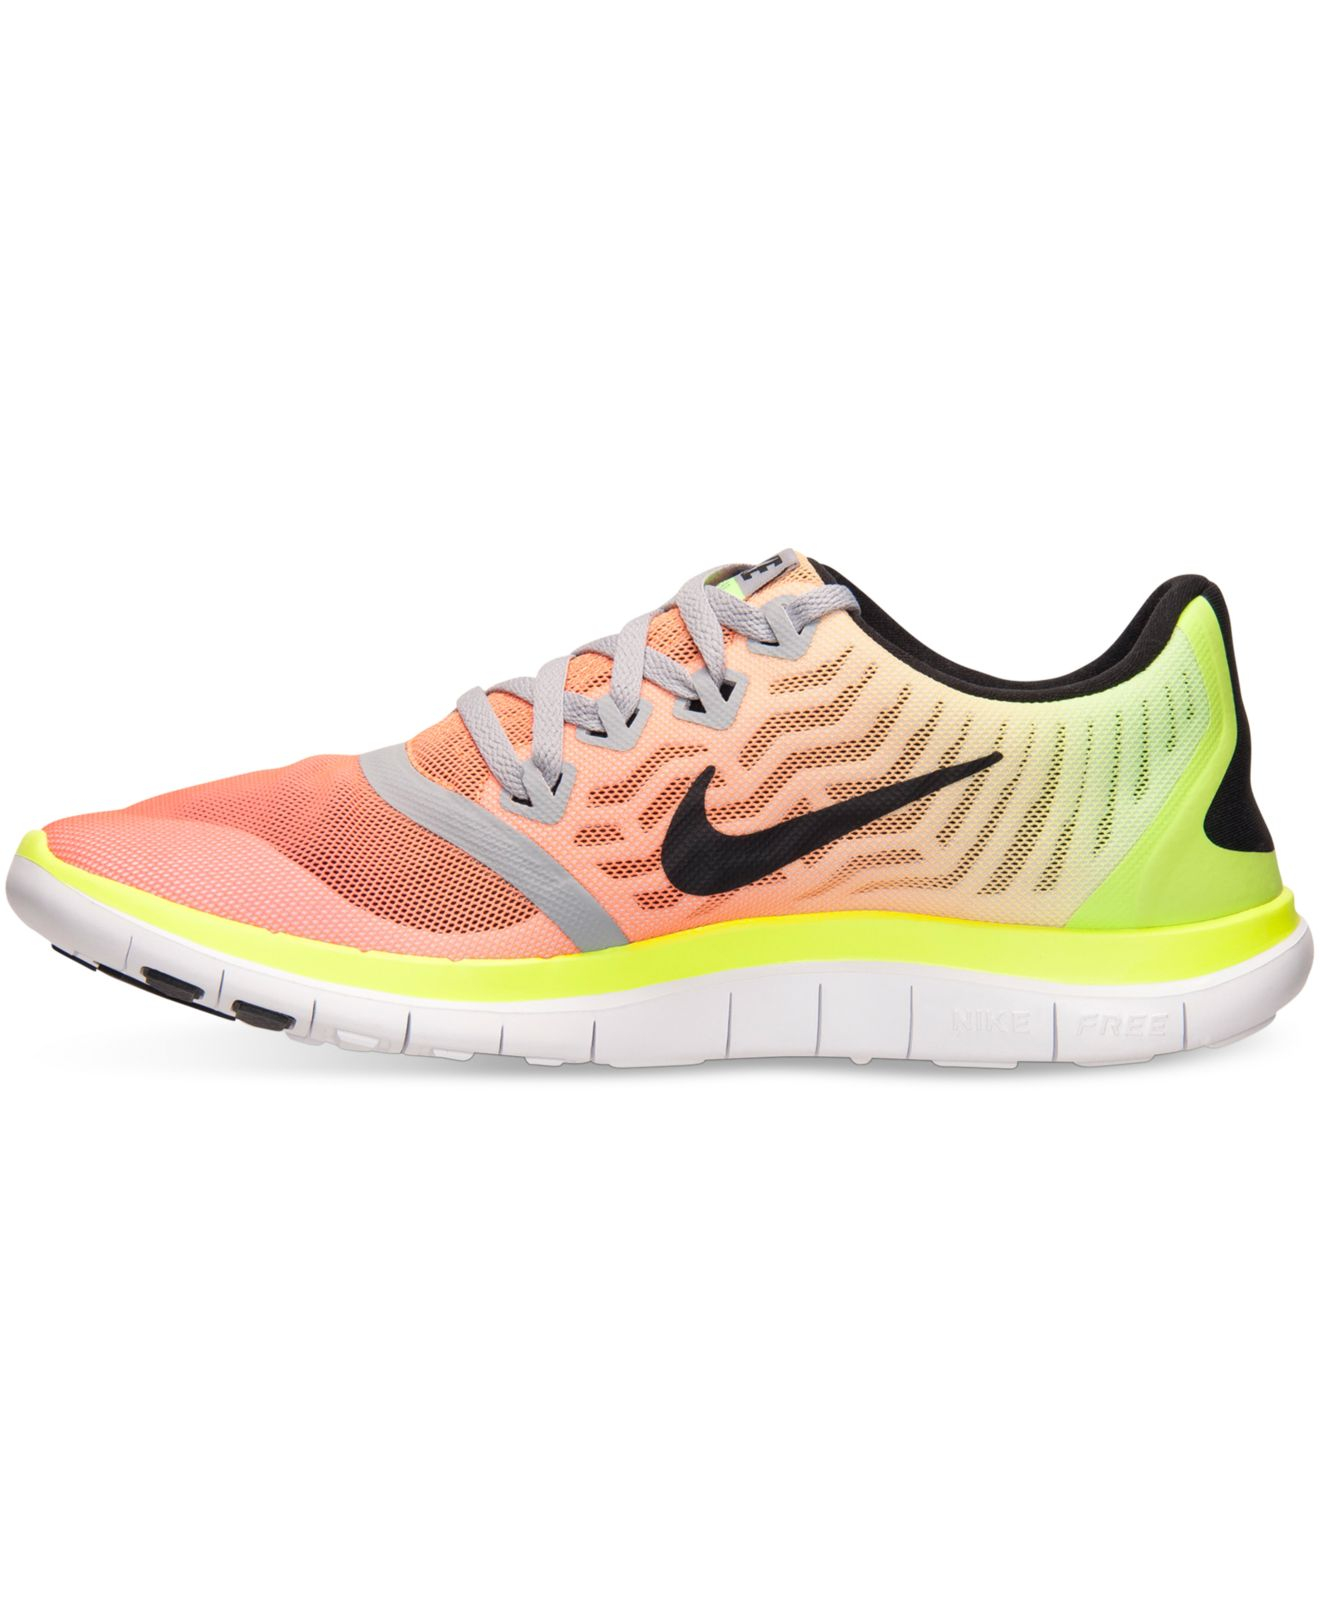 Finish line running shoes for - 28 images - nike mens flex 